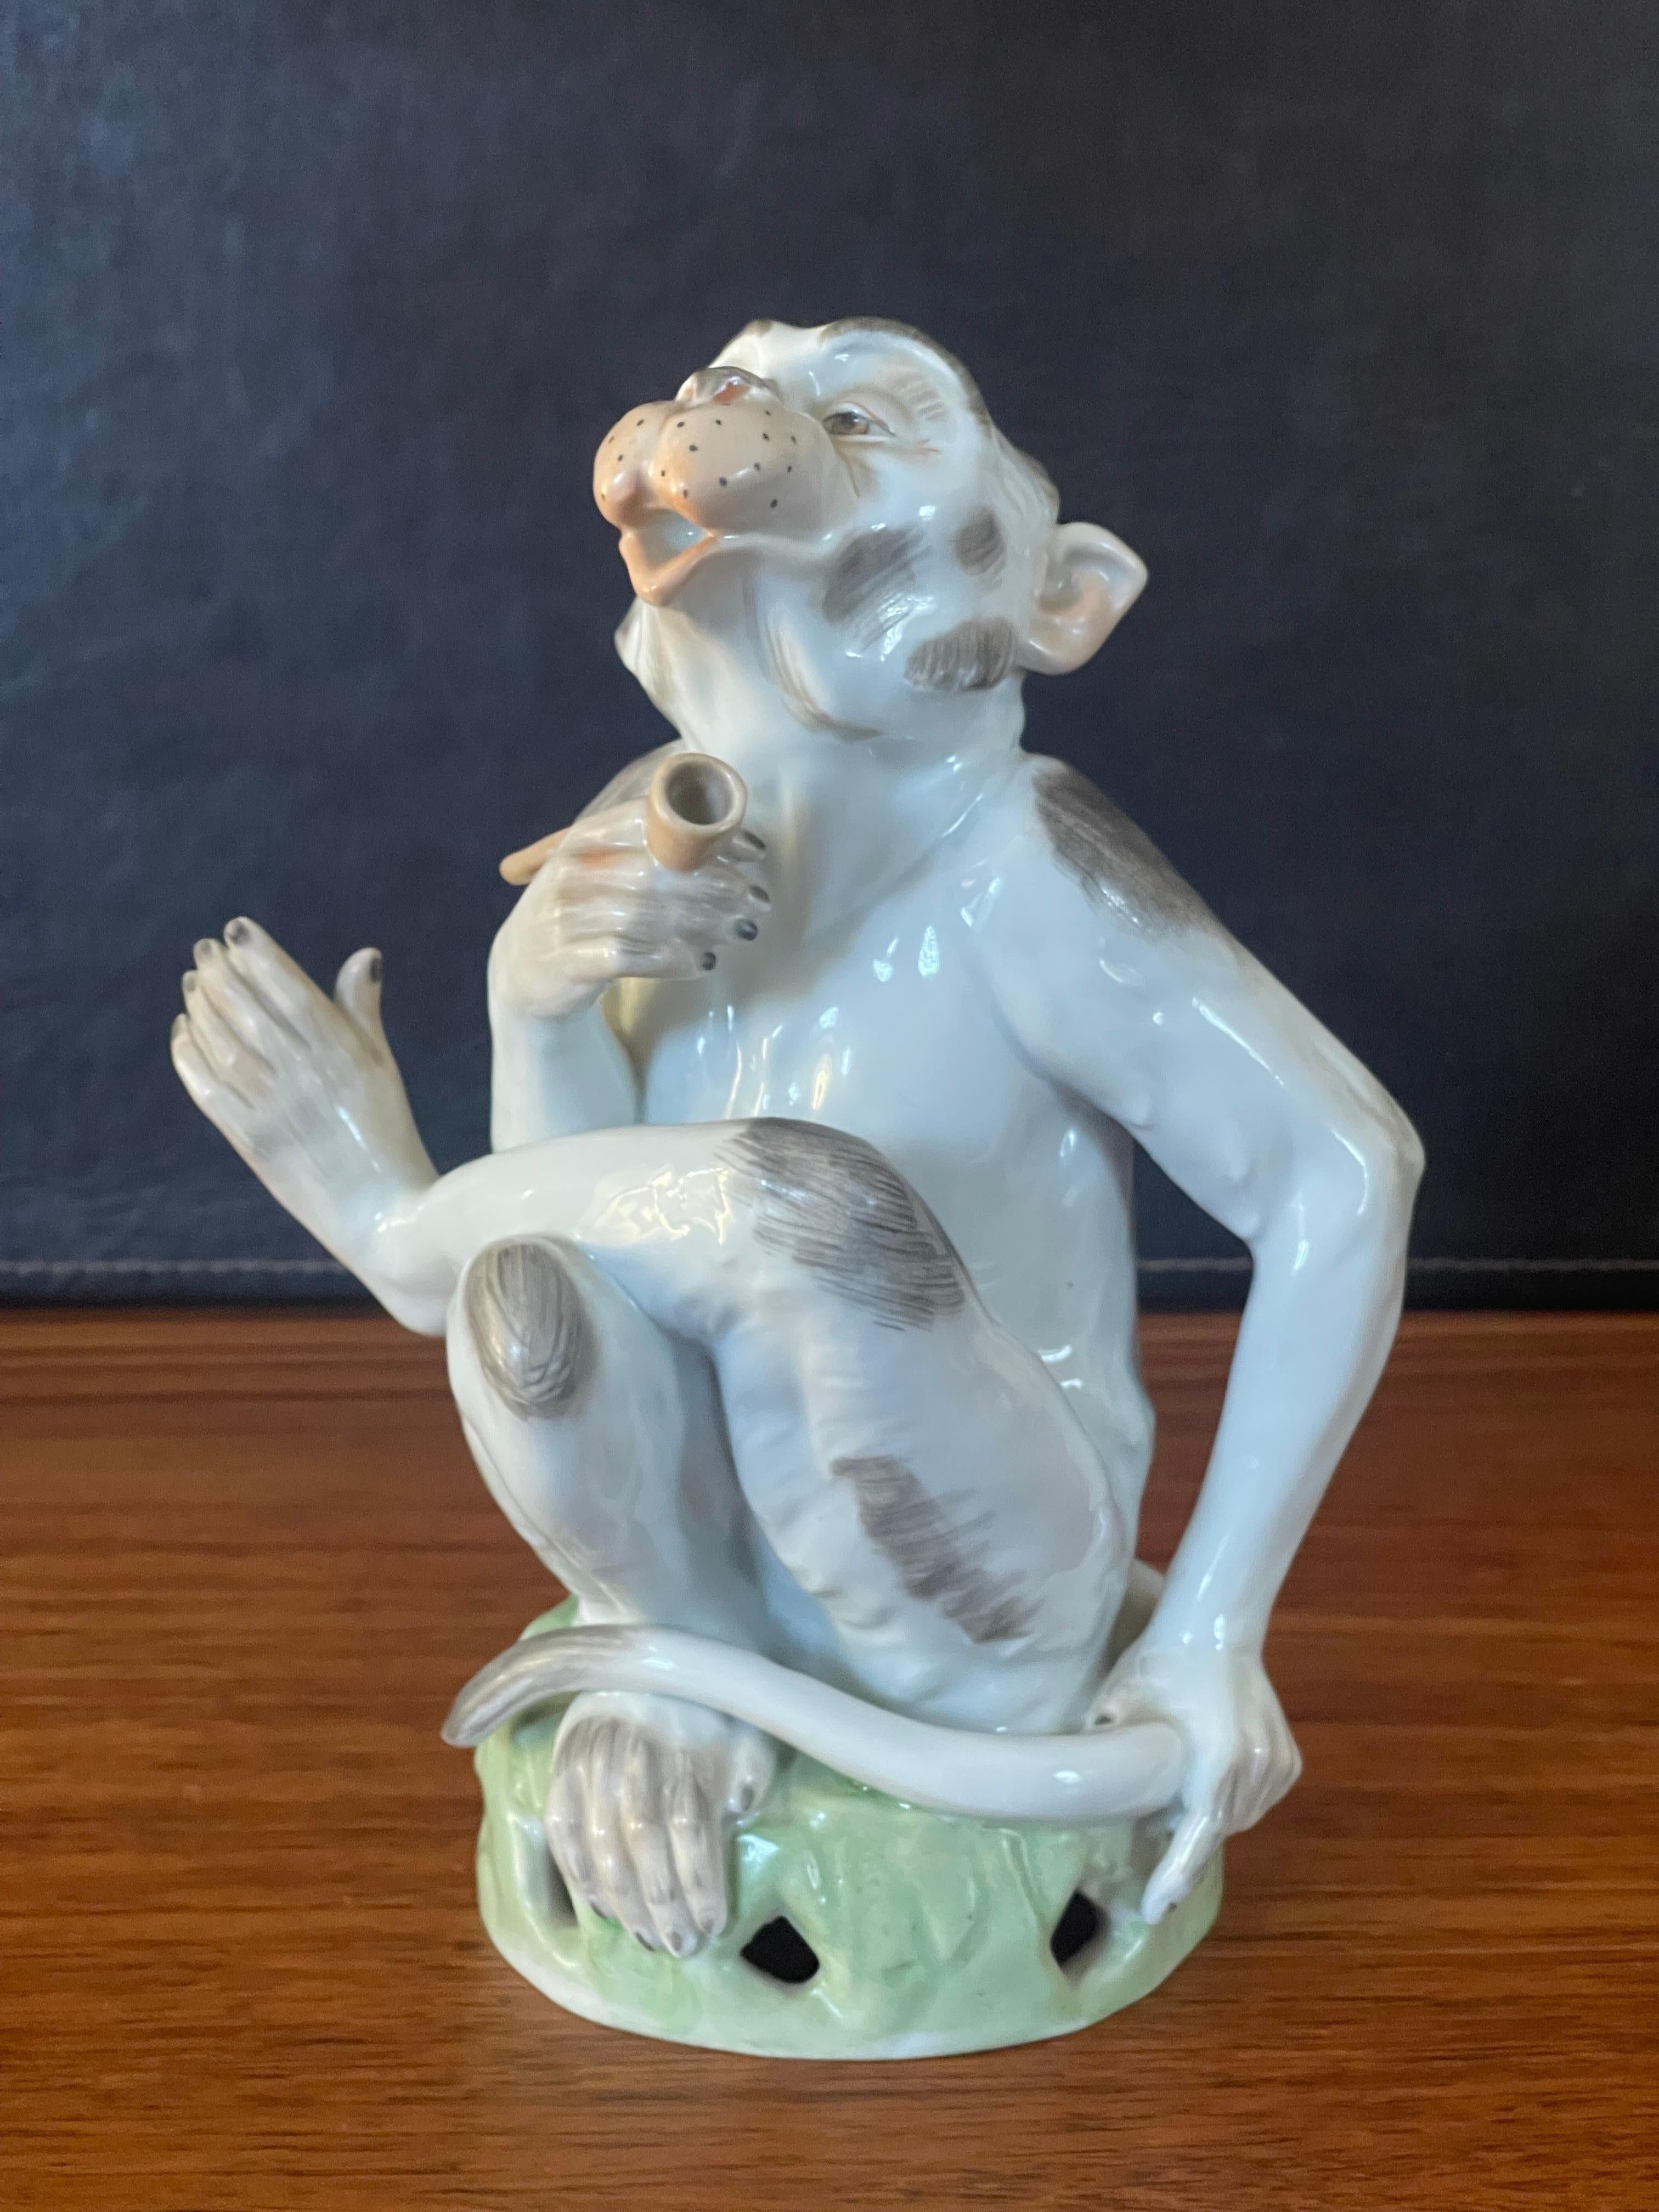 Hand-Painted Porcelain Smoking Monkey with Pipe by Carl Thieme for Dresden